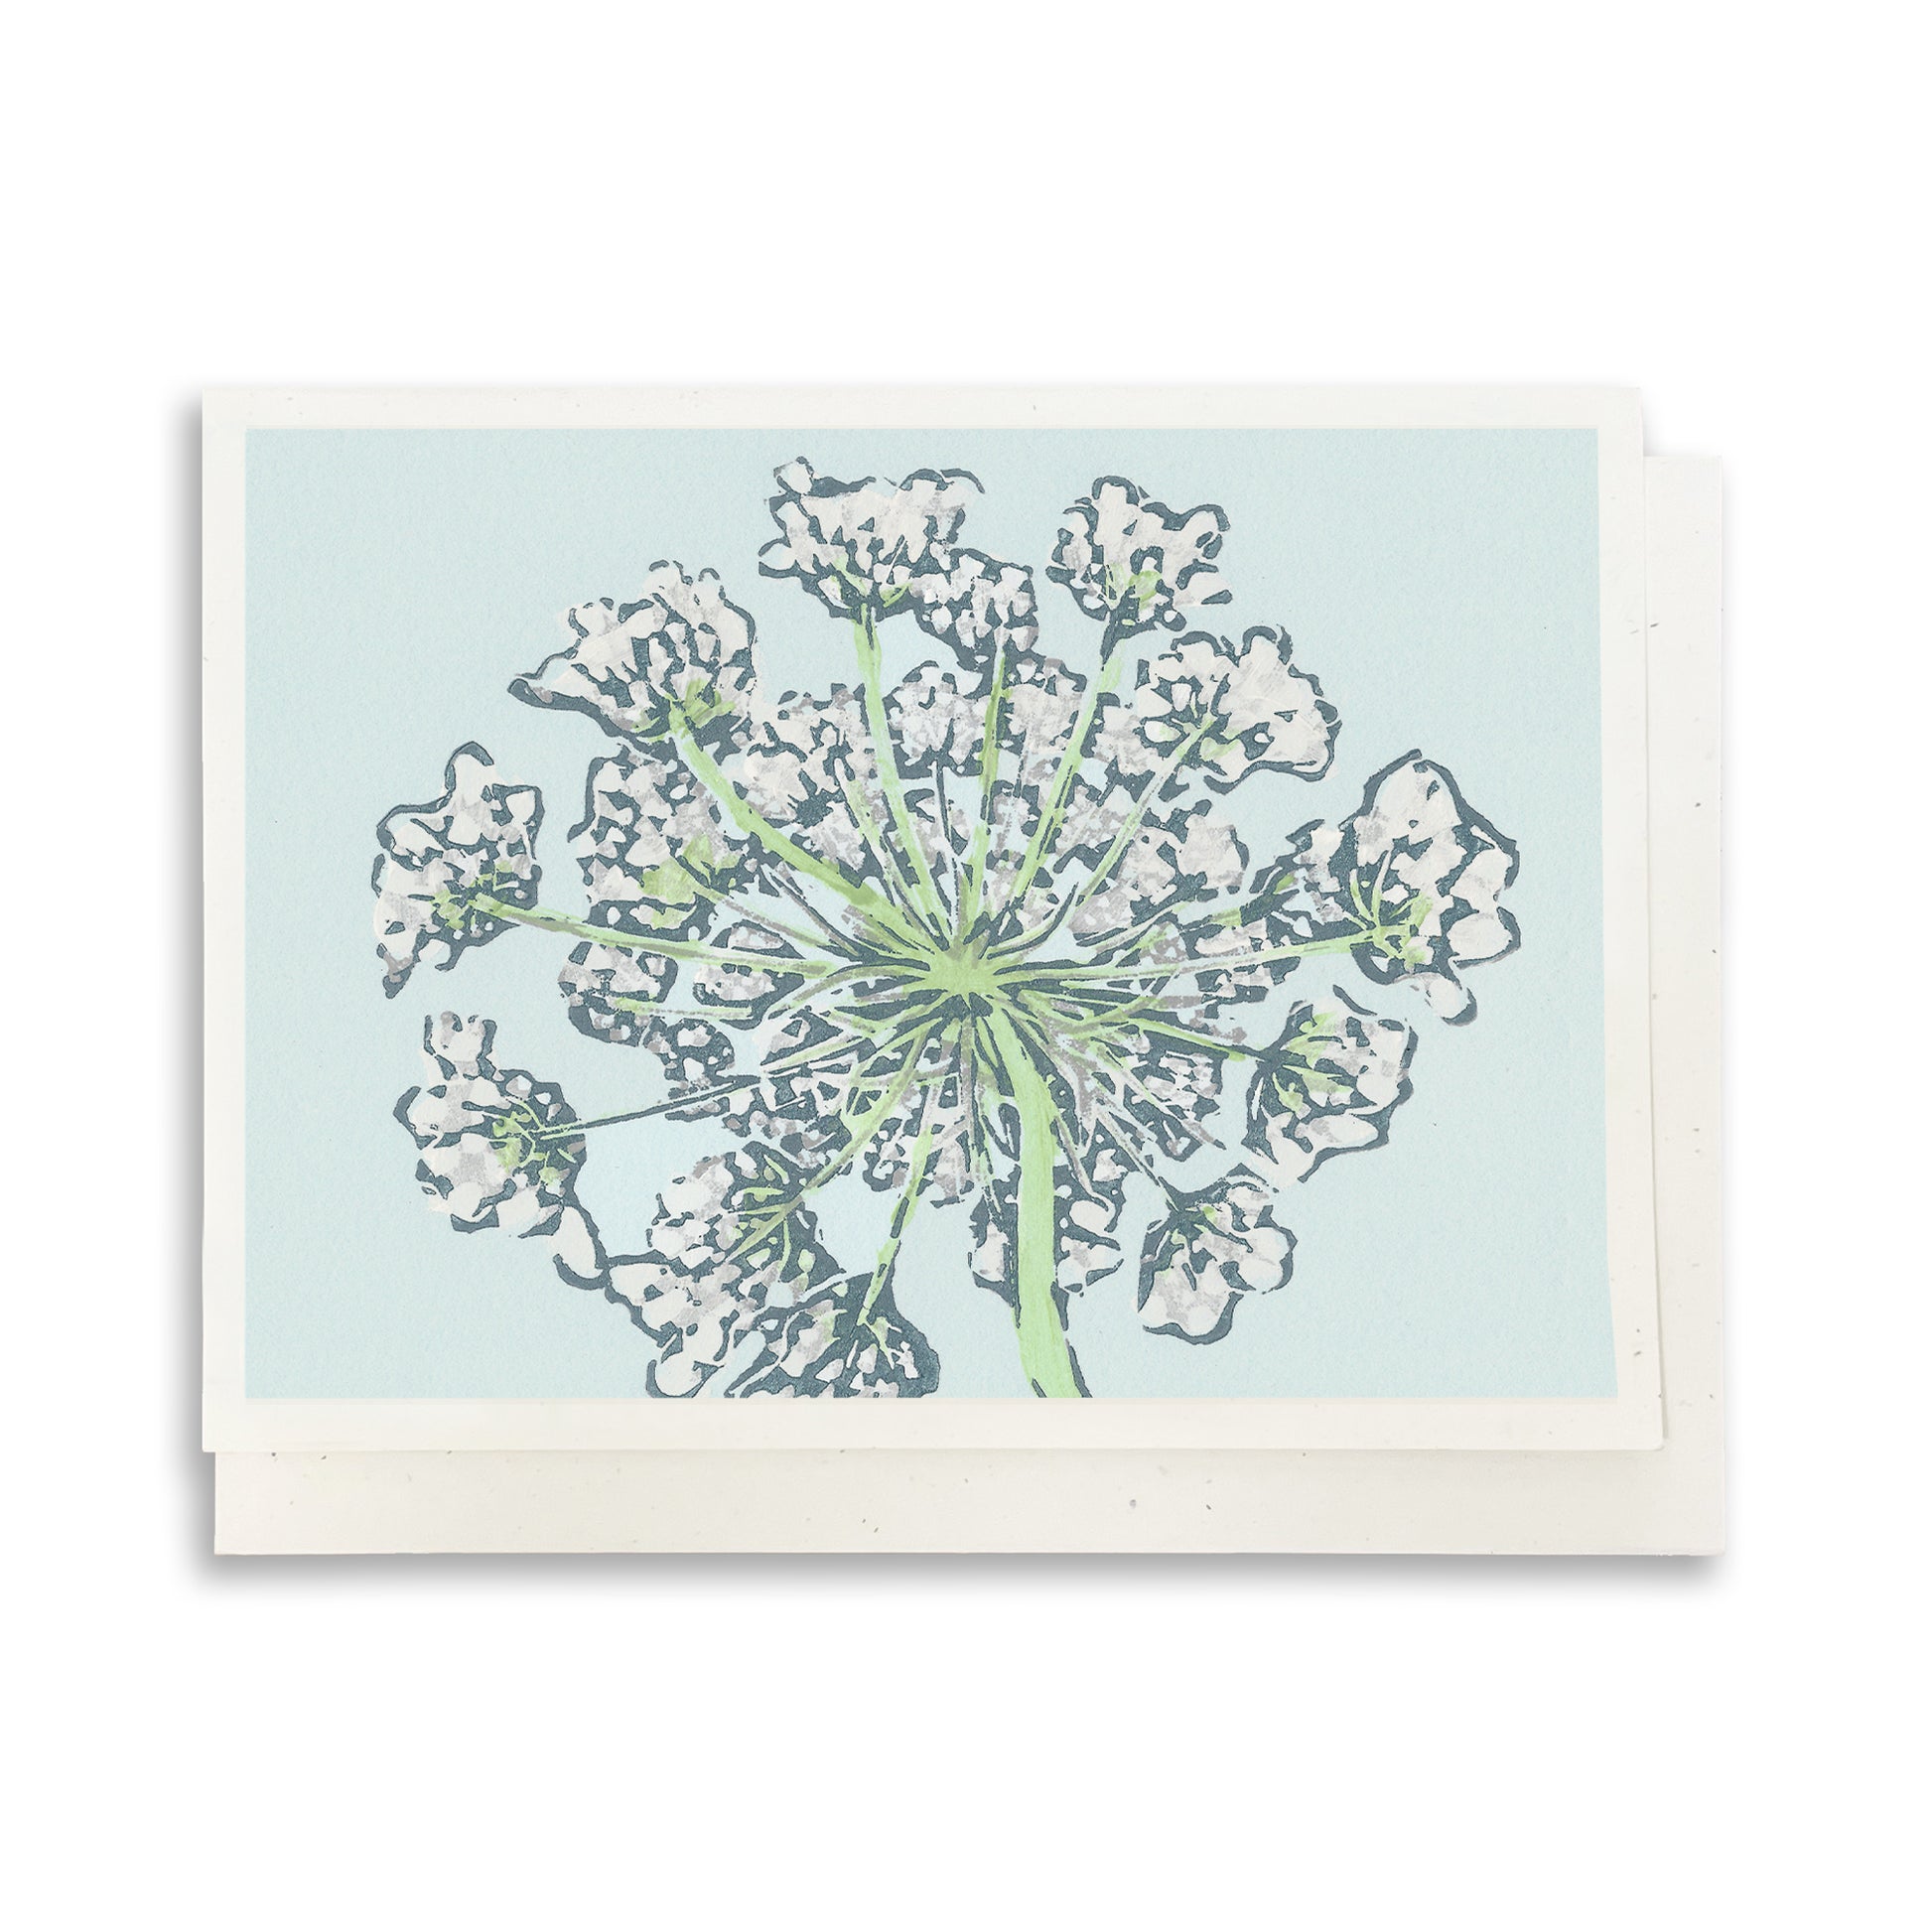 Queen Anne's Lace Blank Greeting Card.  Purple Iris Blank Greeting Card.  A casually elegant card featuring a digital reproduction of Natalia Wohletz’s Peninsula Prints block print design.